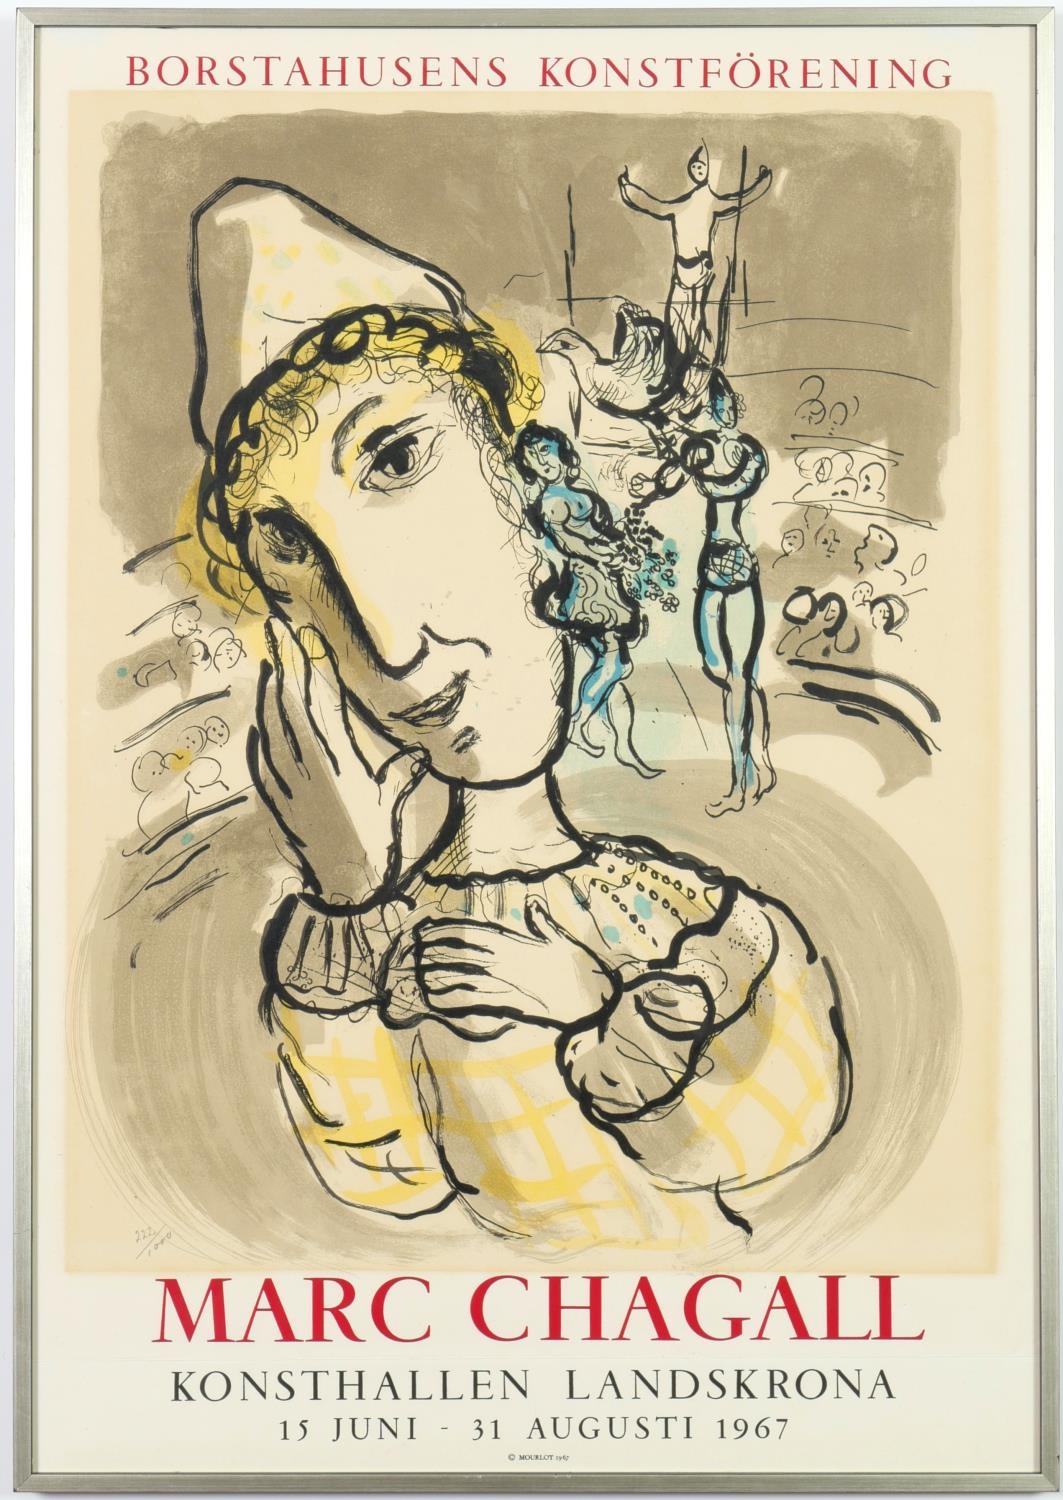 MARC CHAGALL, Circus with yellow clown 1967, original lithographic poster numbered, printed by